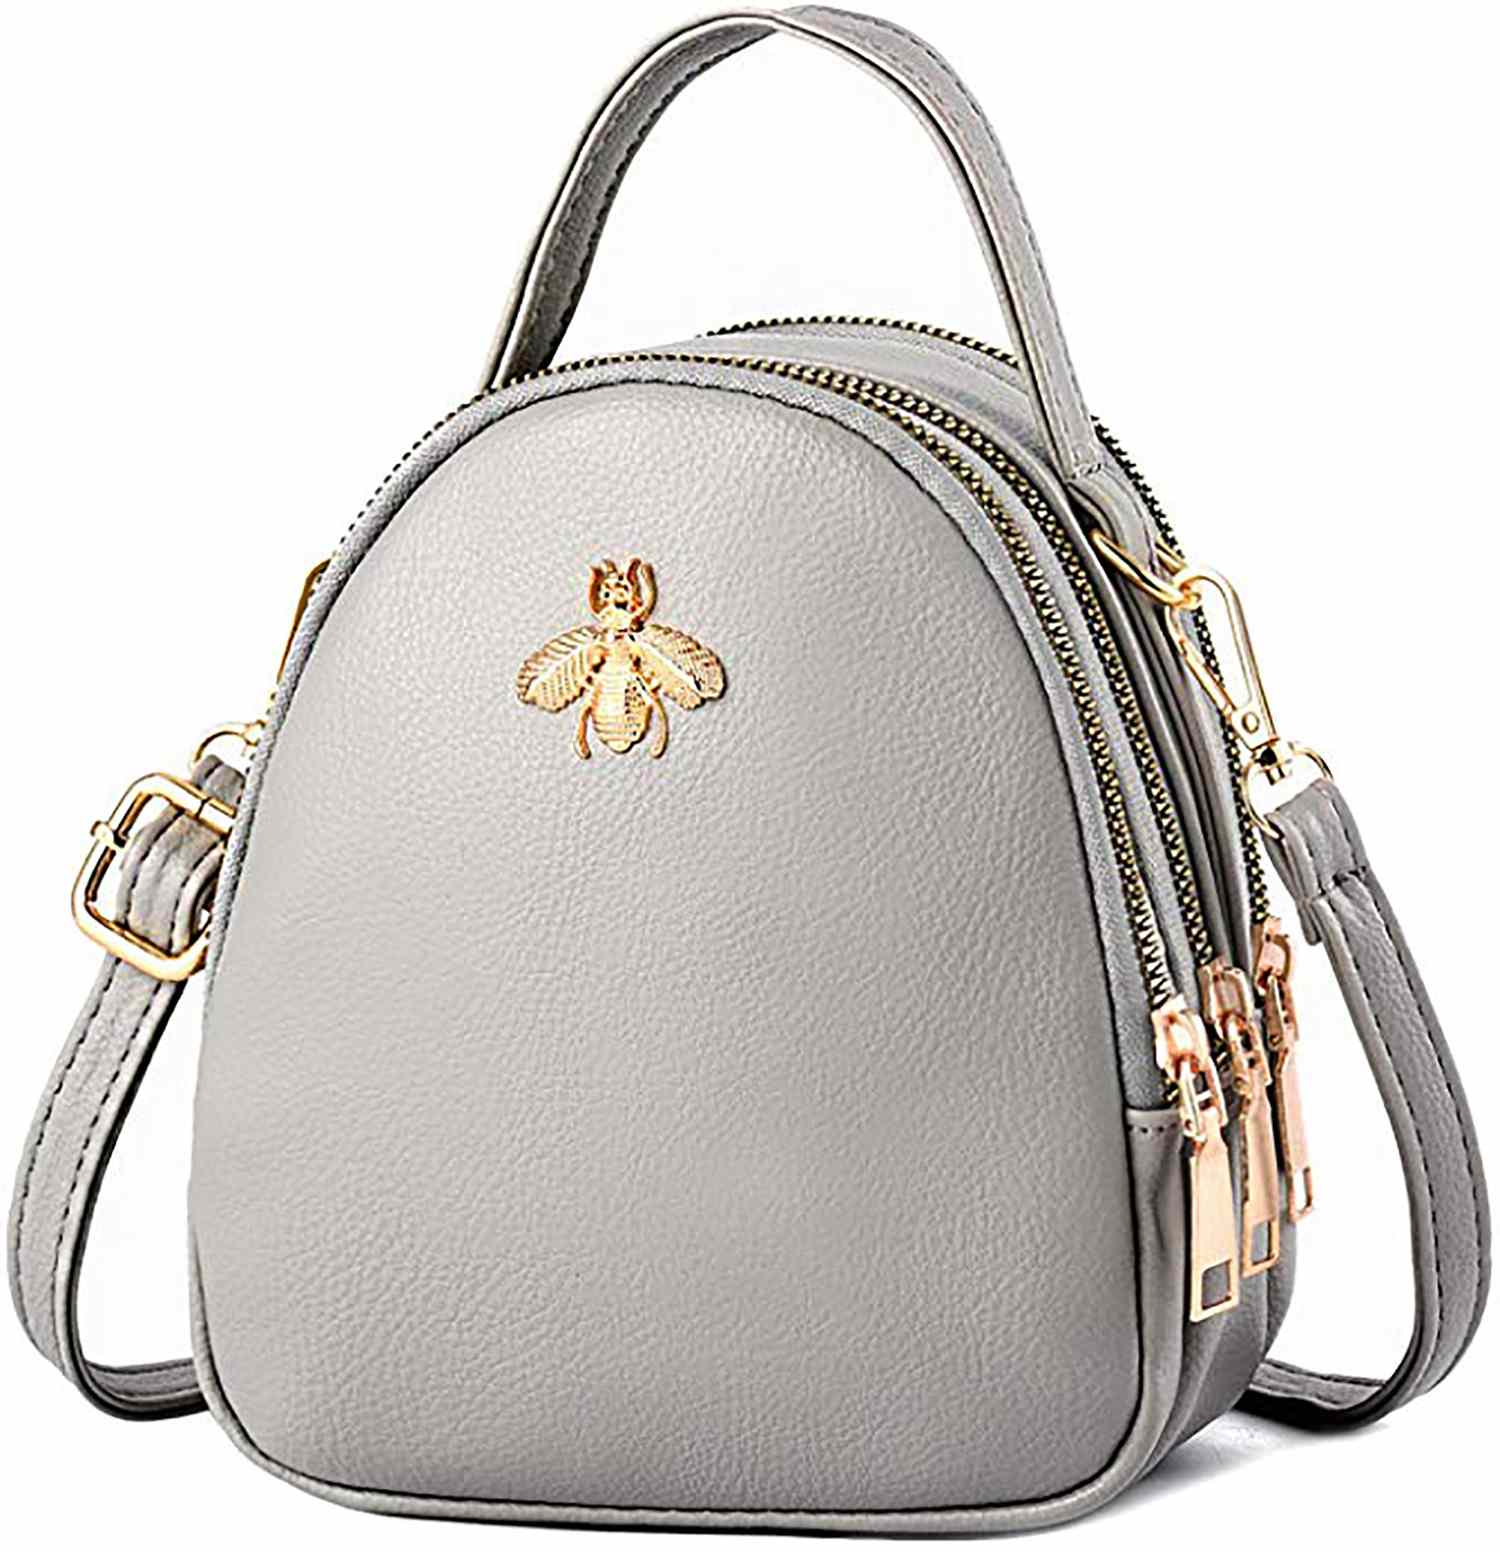 The Simyeer Crossbody Bag on Amazon Is Cute and Affordable | PEOPLE.com